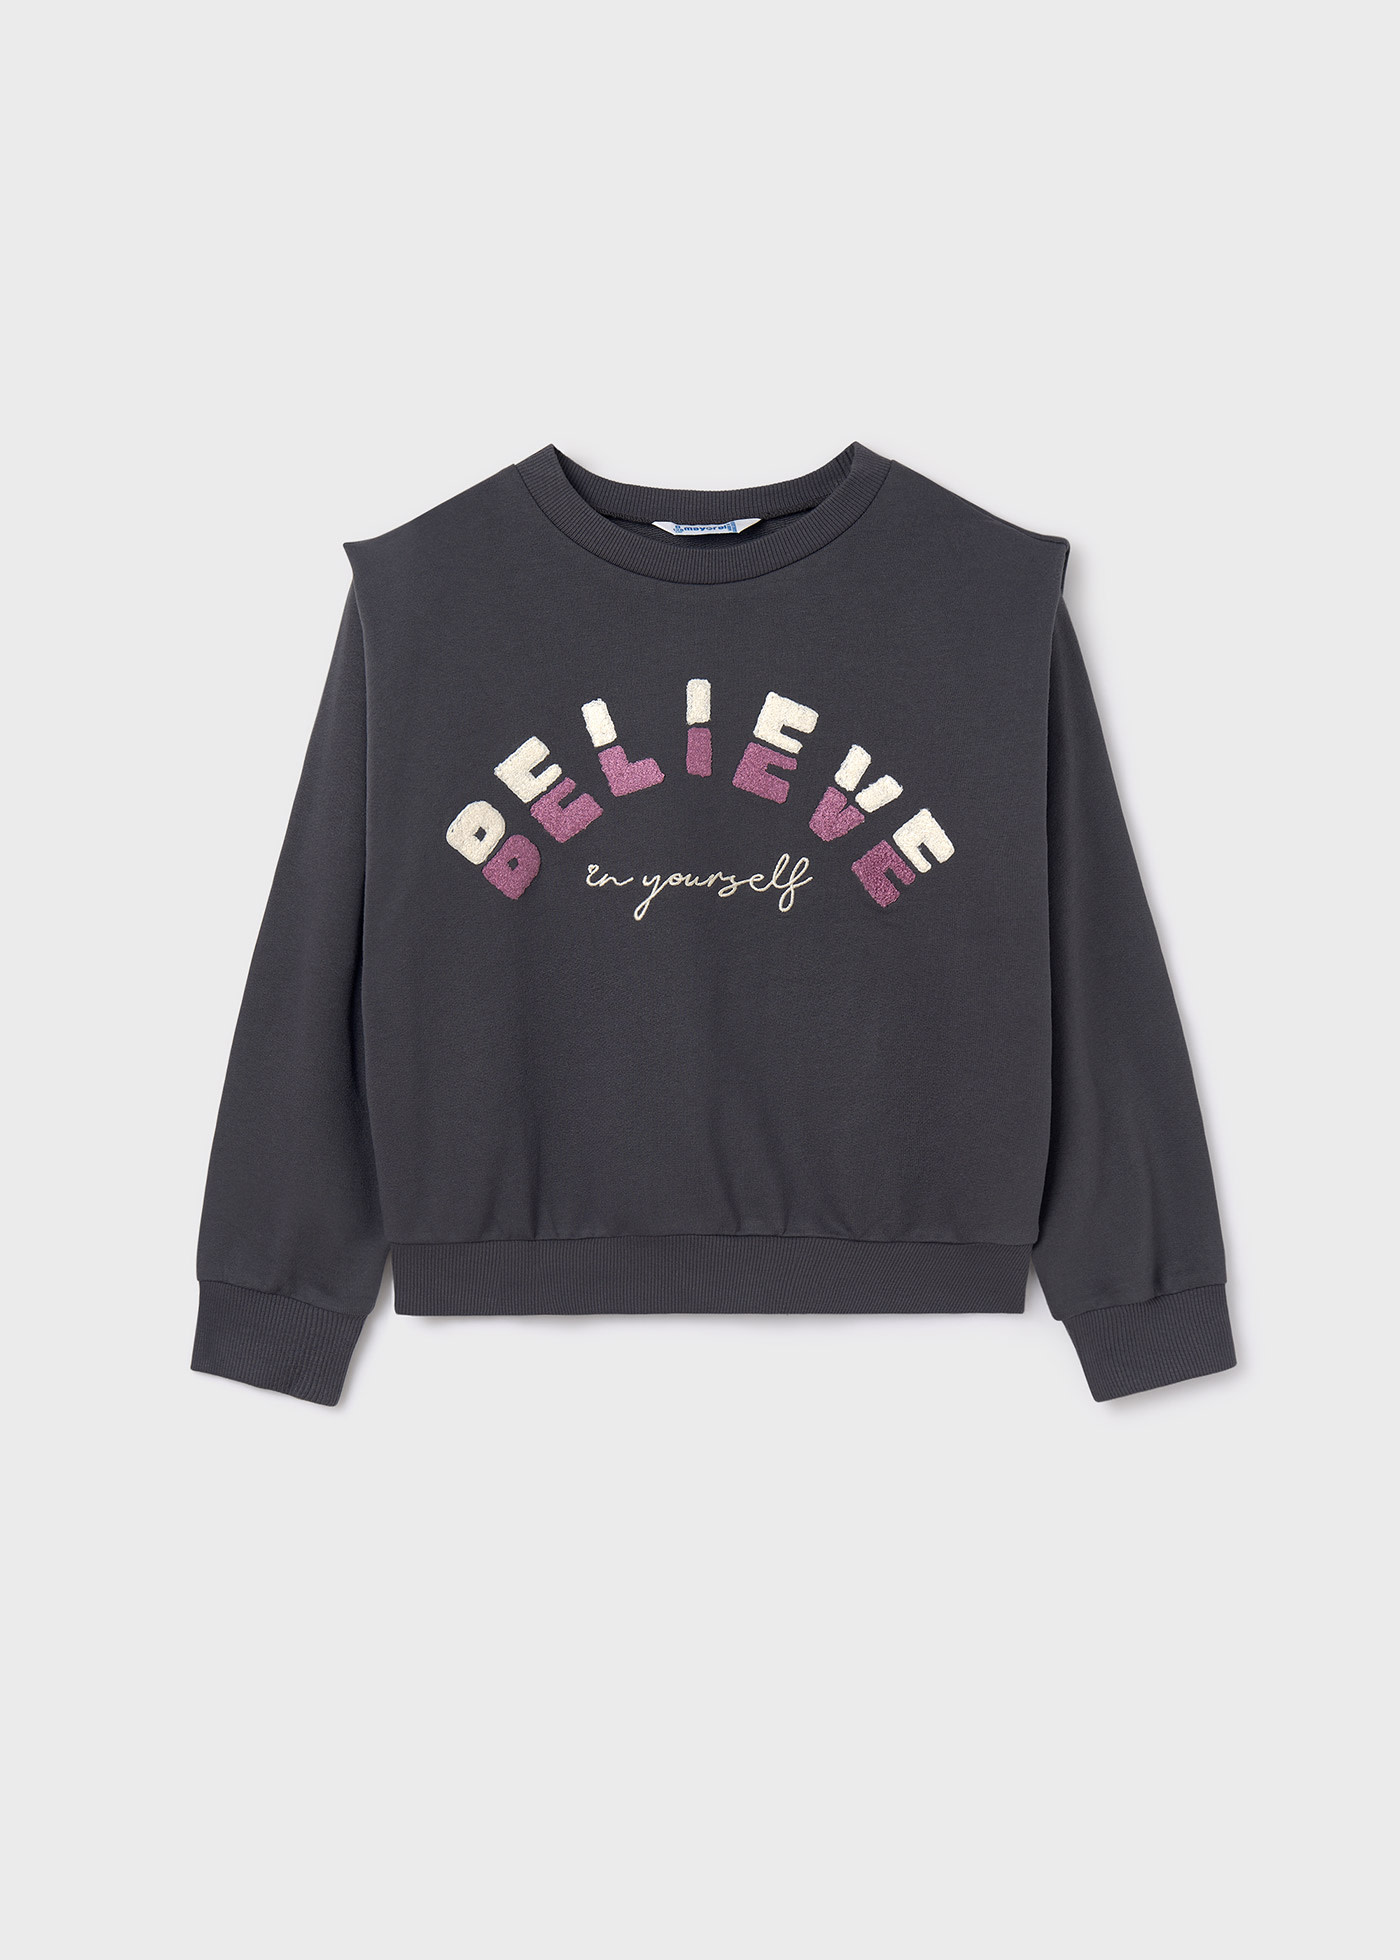 Sweatshirt with shoulder pads for girls